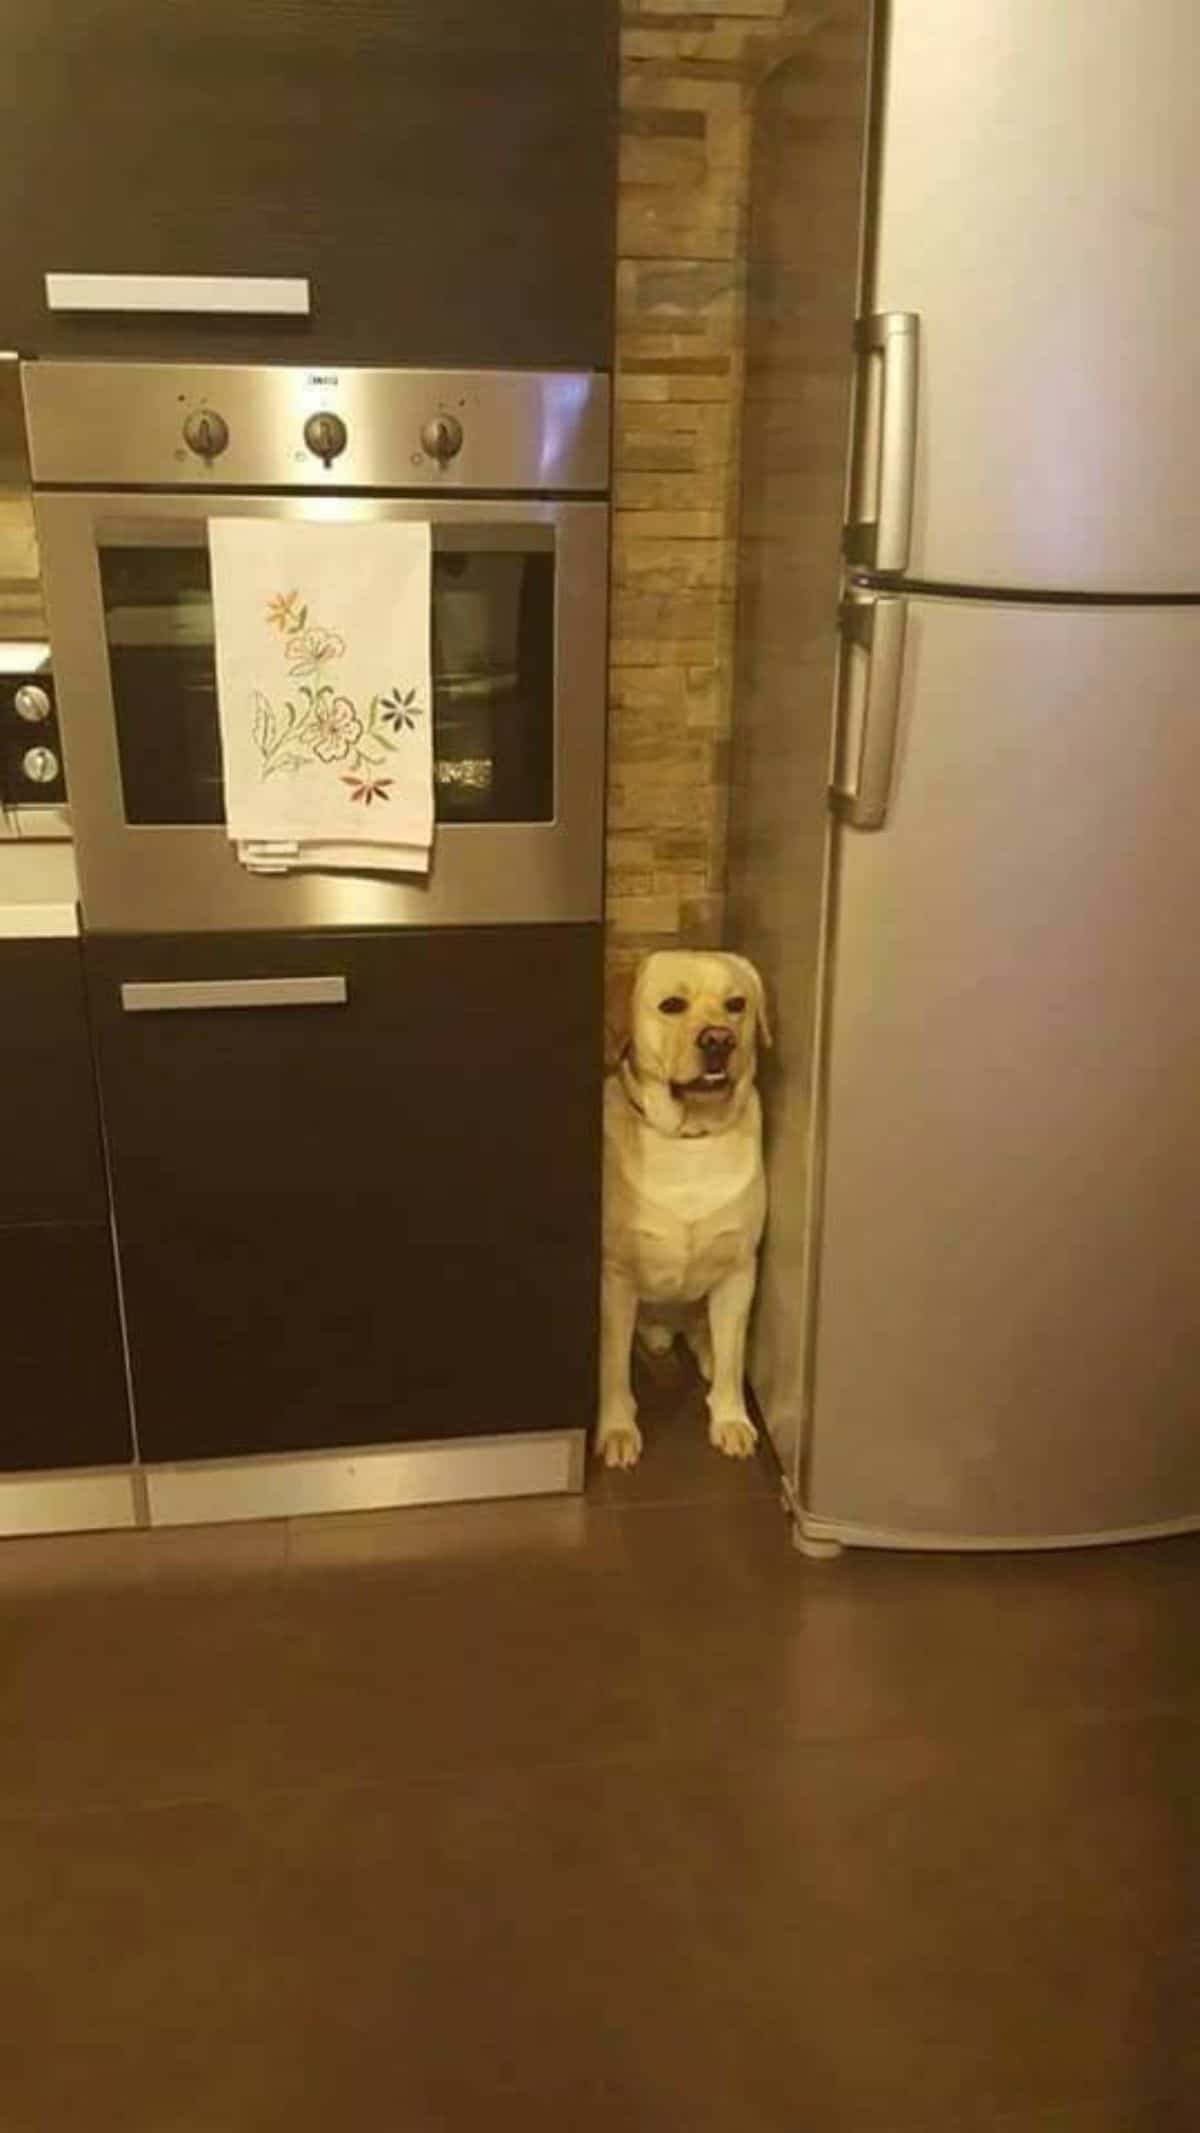 yellow labrador retriever sitting between a fridge and a kitchen cabinet